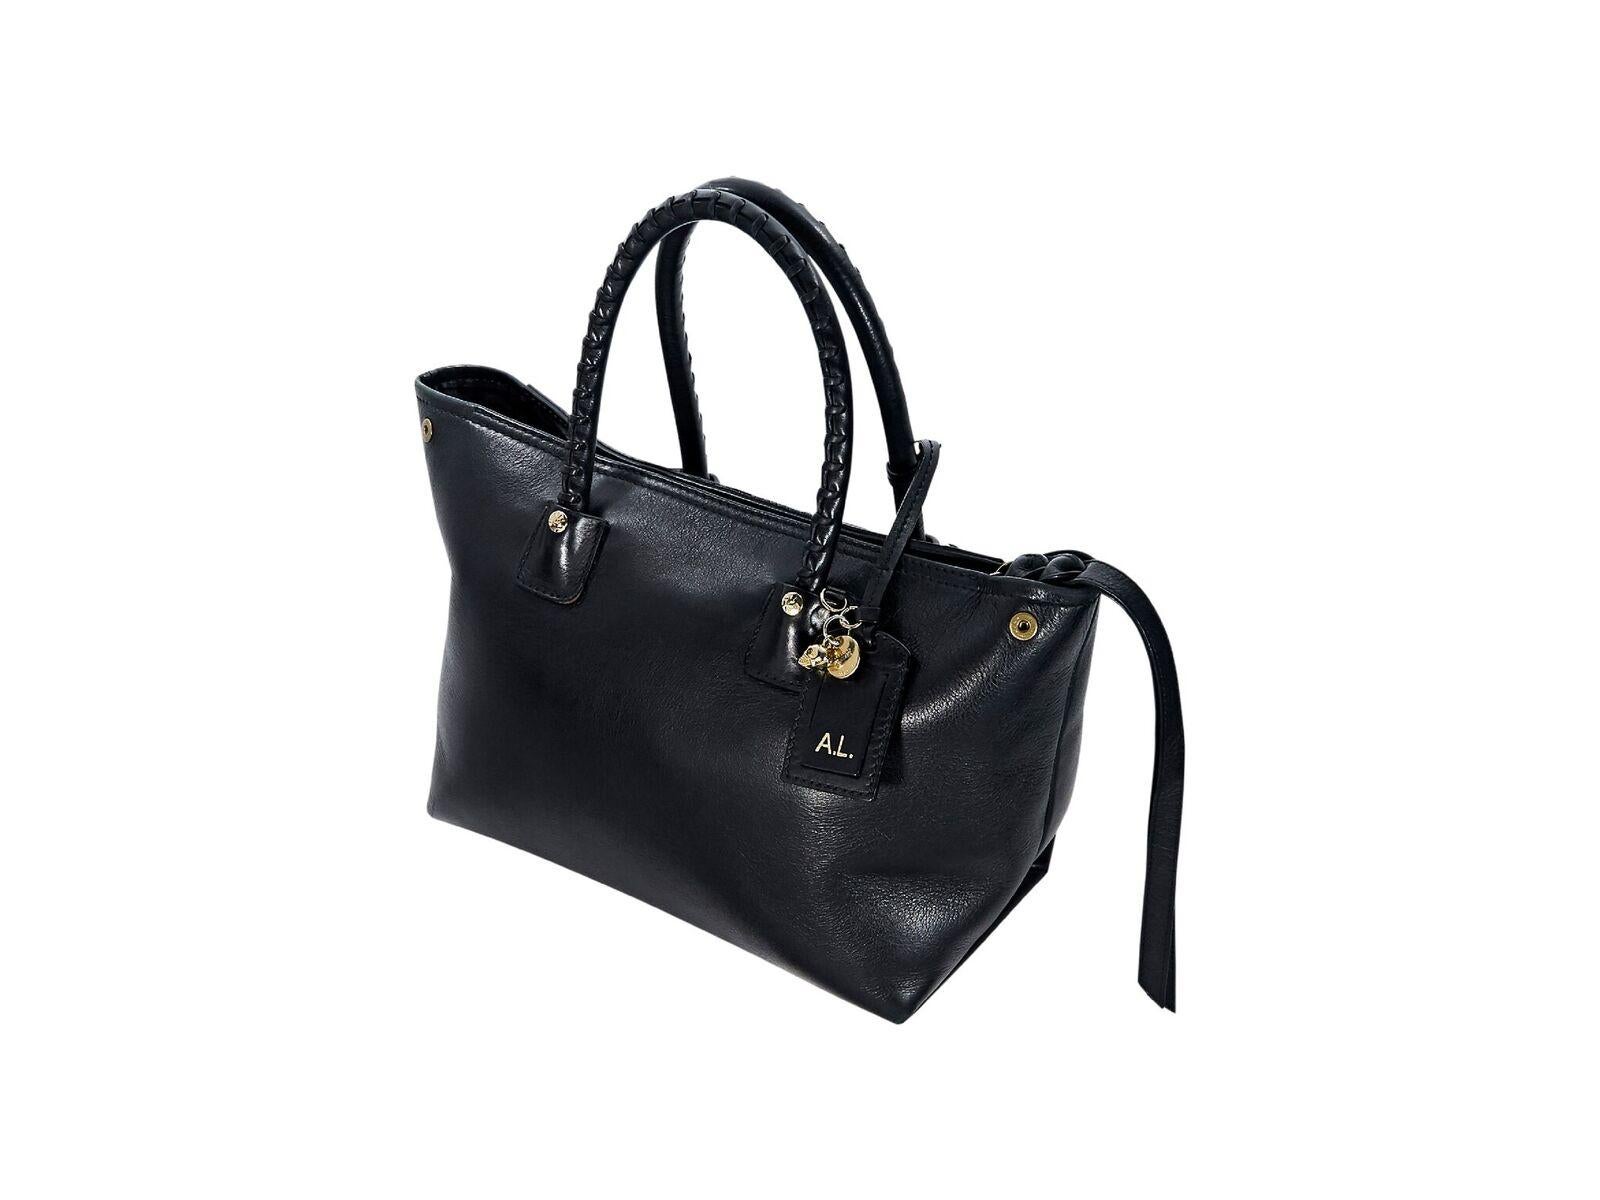 Product details:  Black leather satchel by Alexander McQueen.  Accented with whipstitching.  Dual carry handles.  Detachable, adjustable shoulder strap.  Top zip closure.  Lined interior with inner zip pocket.  Exterior zip pocket.  Protective metal